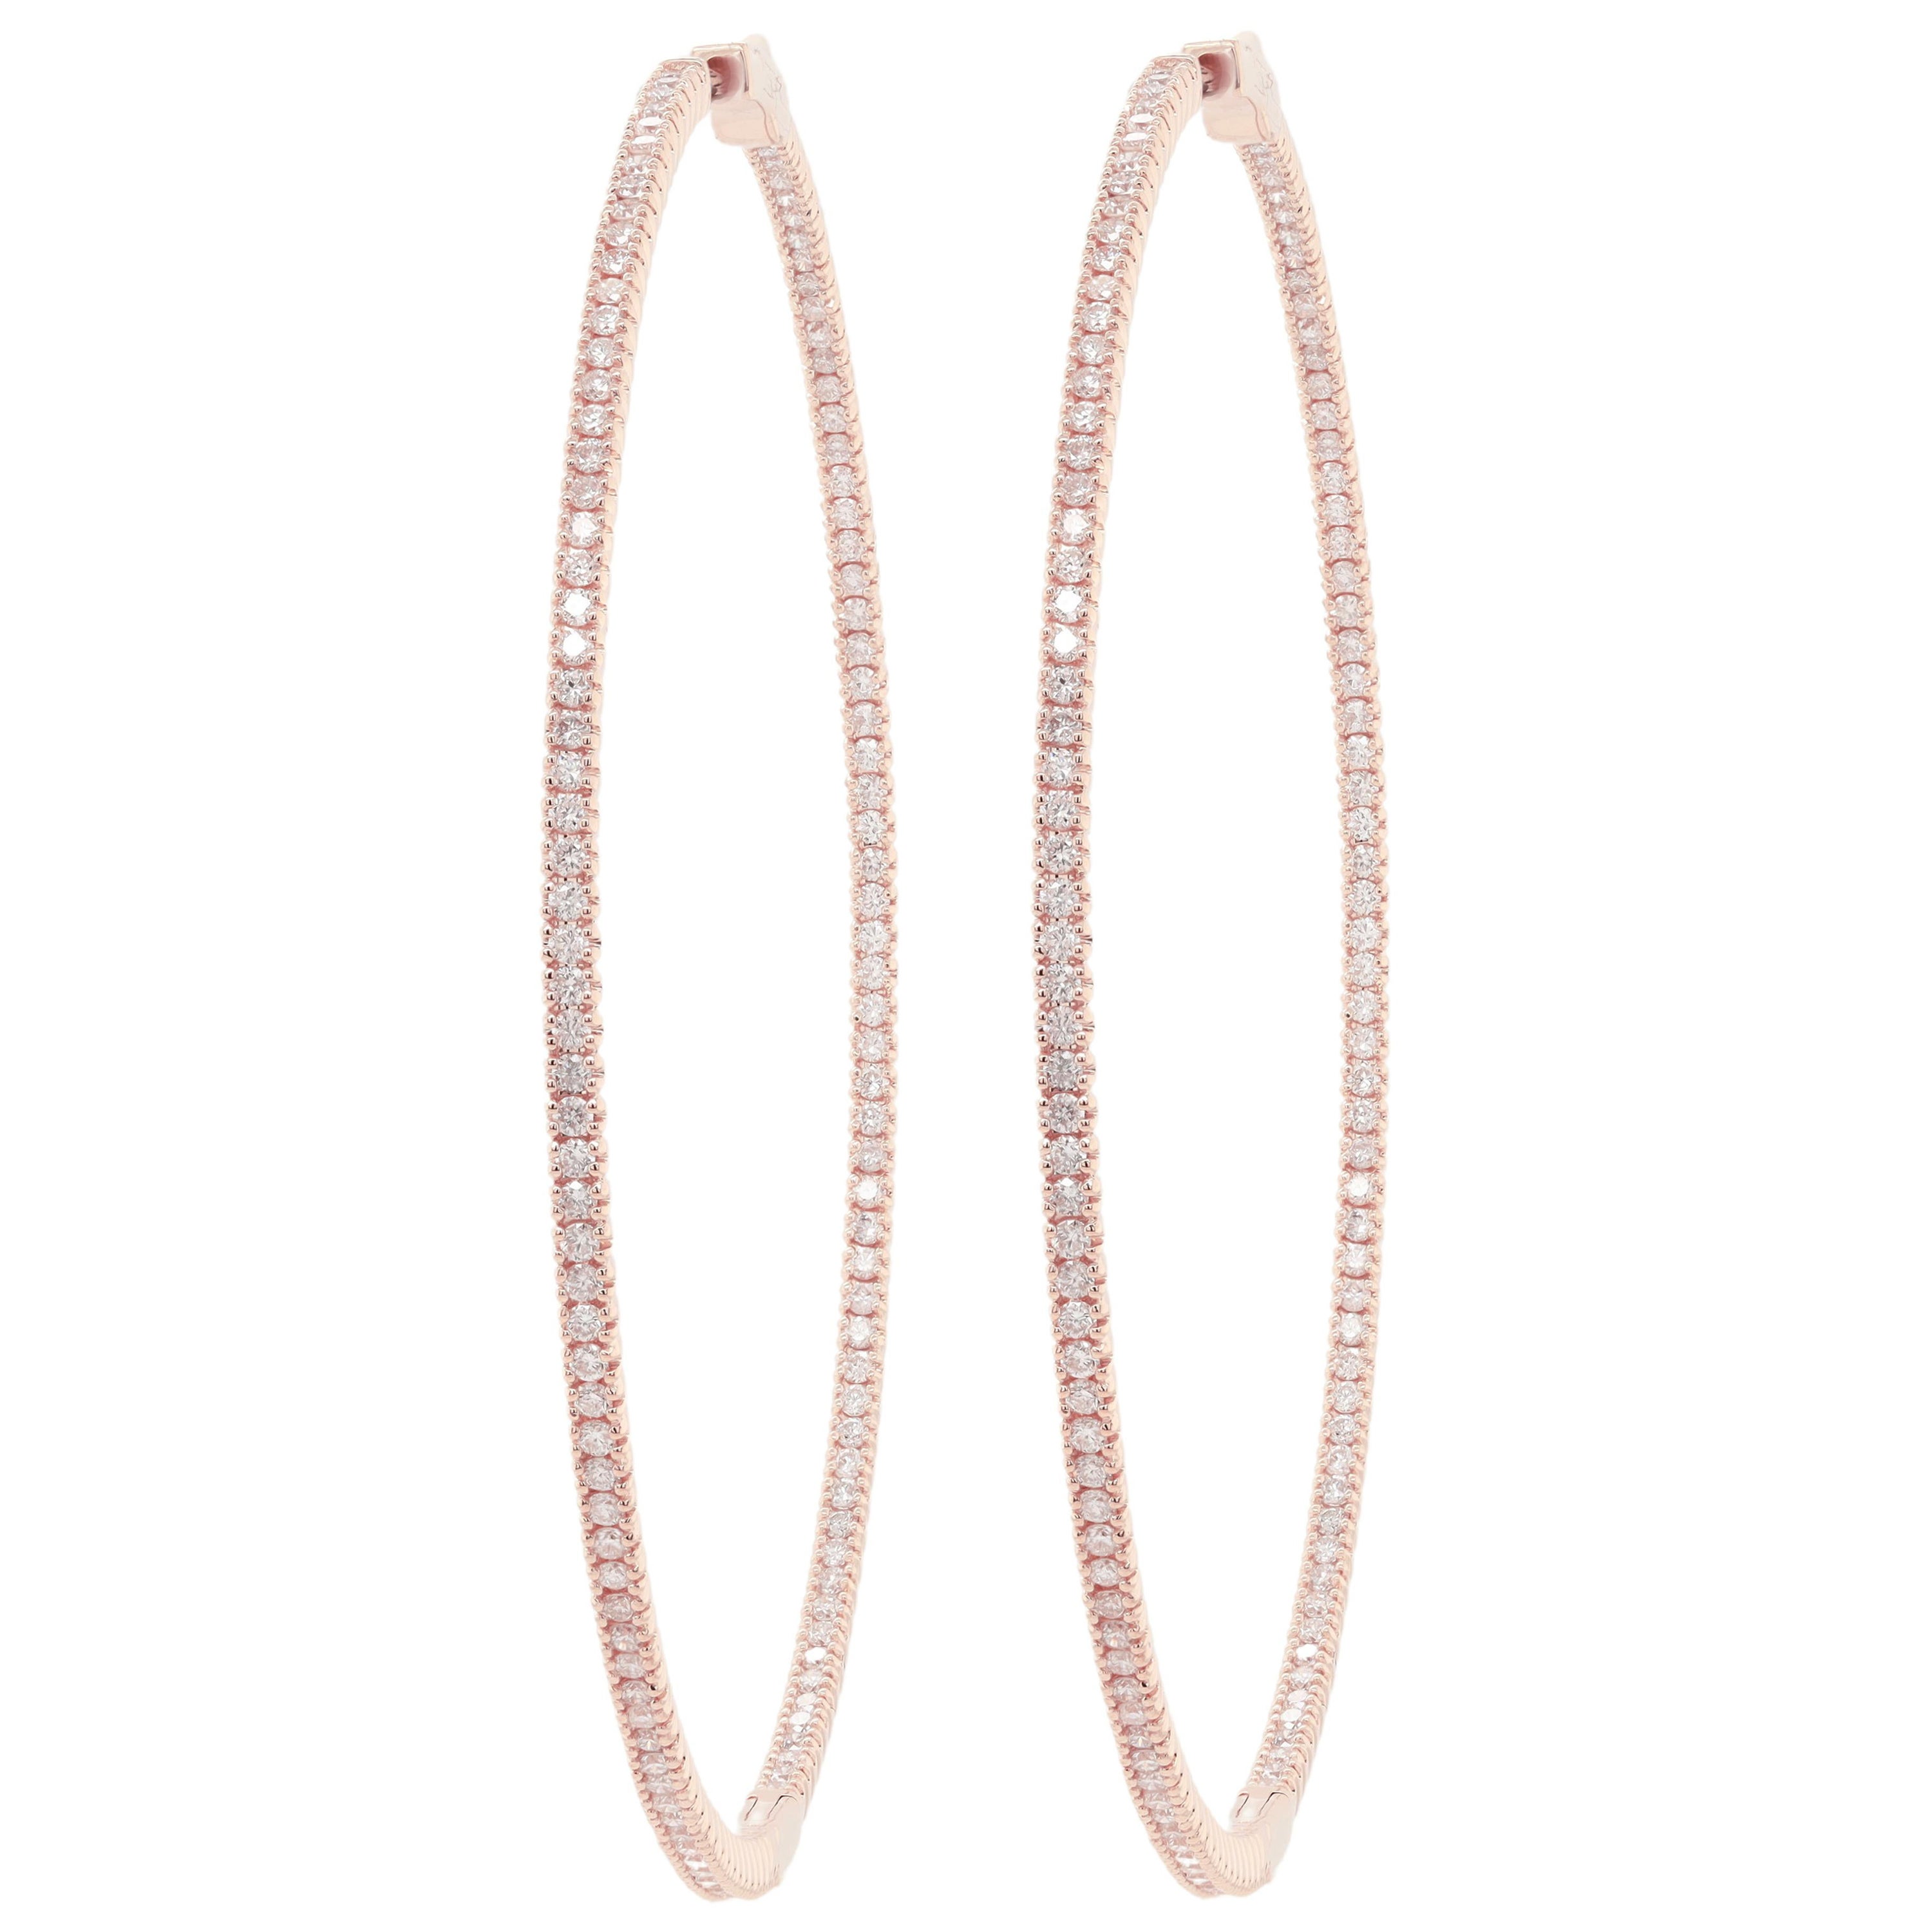 Diana M. 14kt rose gold, 1.75" hoop earrings featuring 1.30 cts round diamond